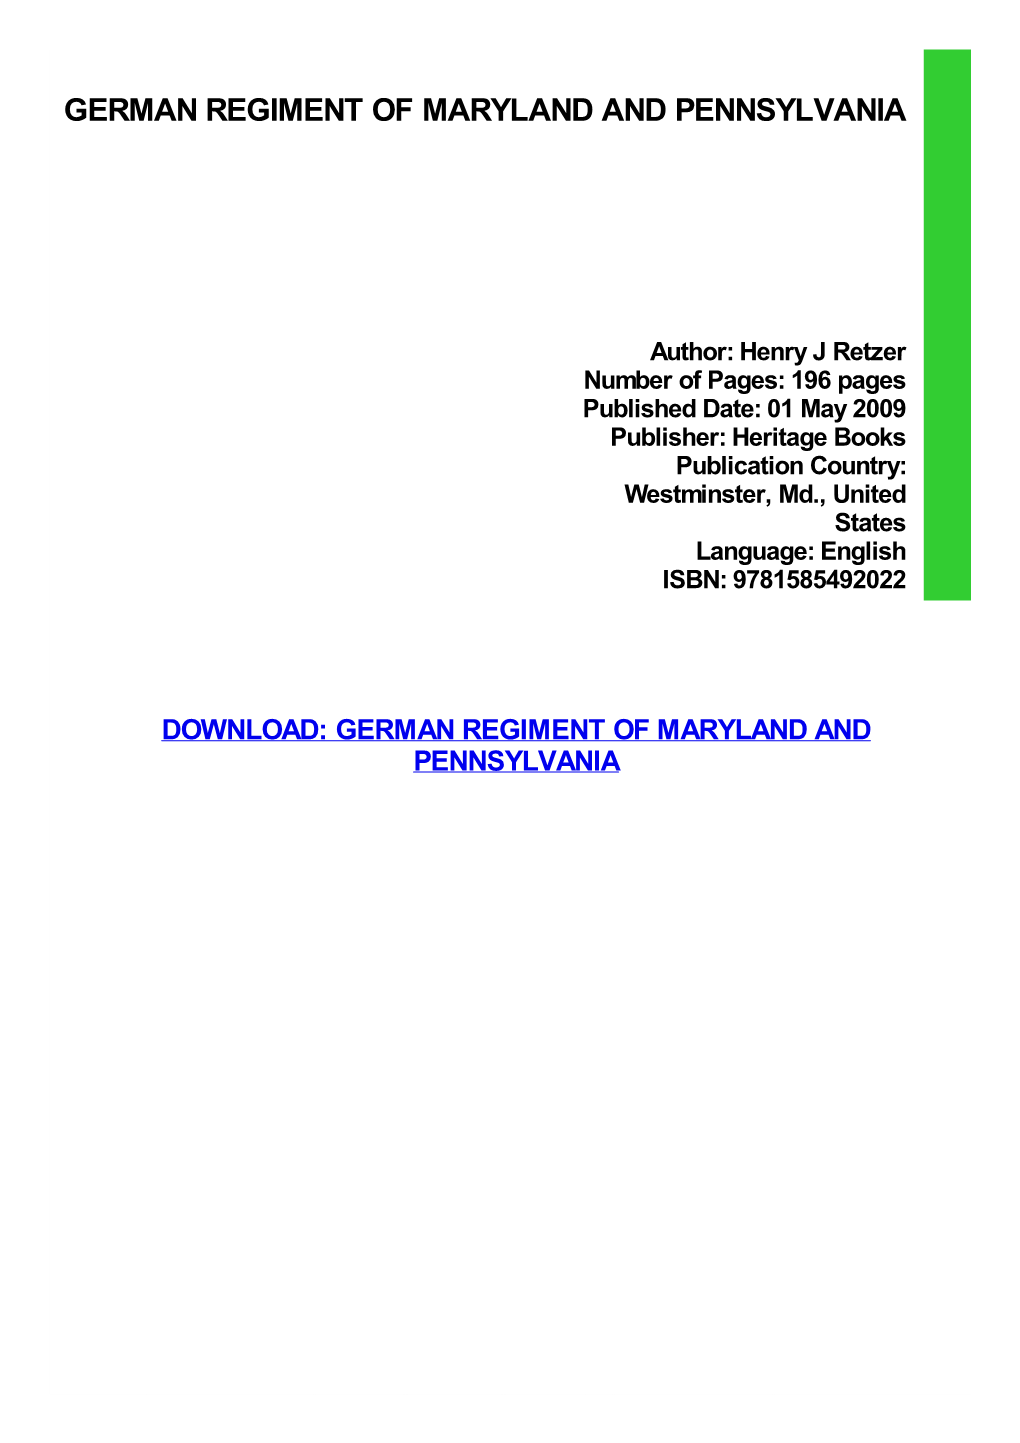 German Regiment of Maryland and Pennsylvania Download Free